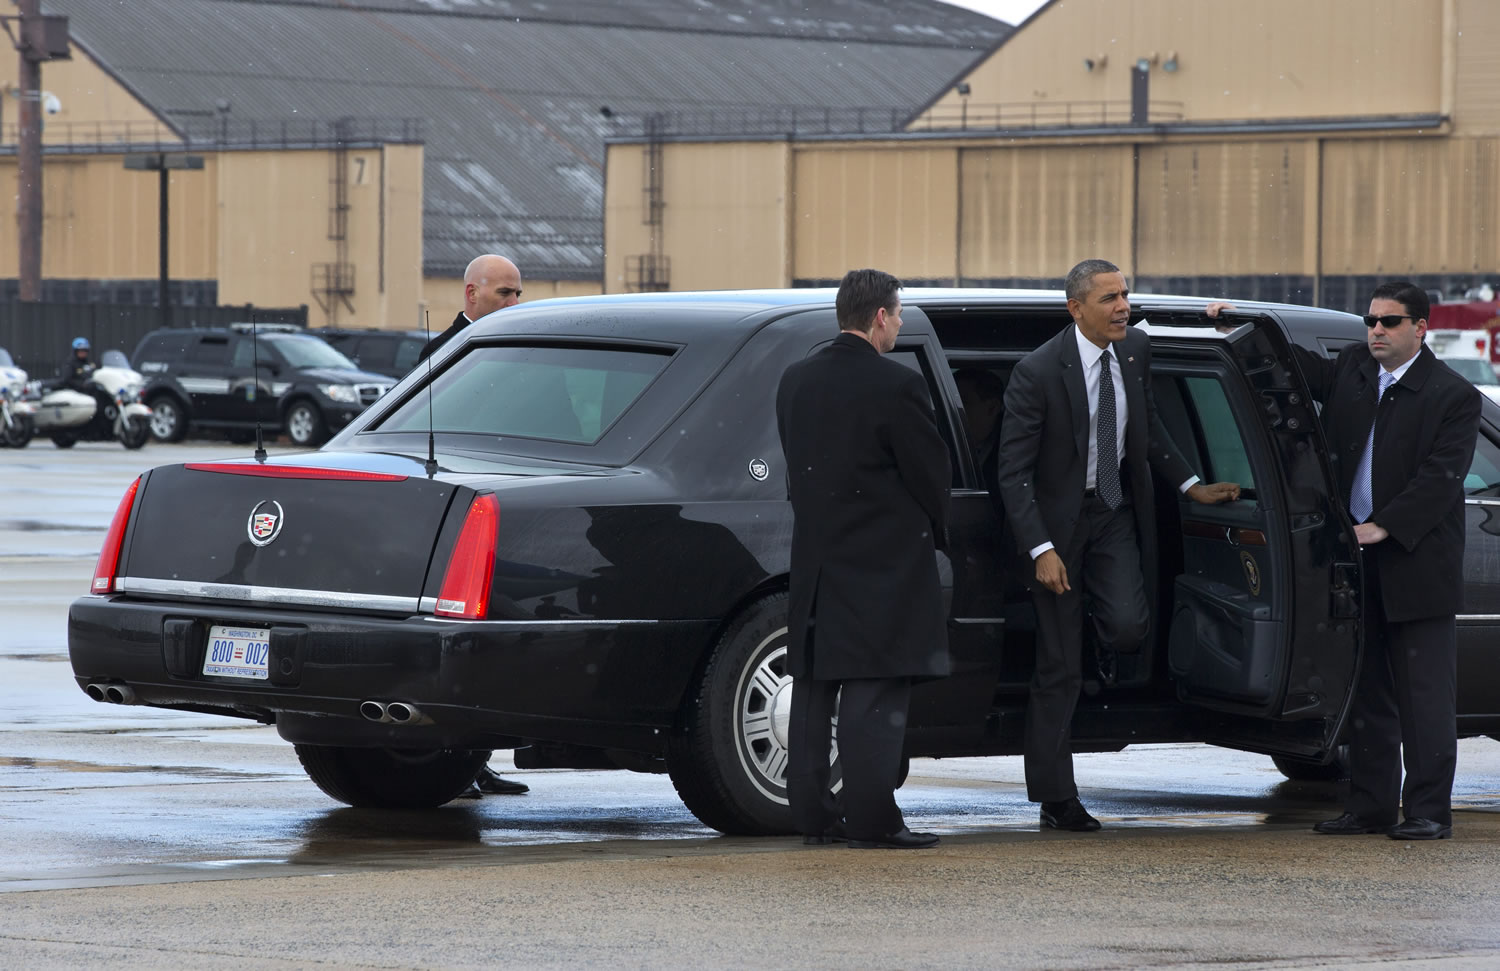 President Barack Obama arrives via motorcade in a light snow on Wednesday at Andrews Air Force Base, Md., before boarding Air Force One for a trip to St.